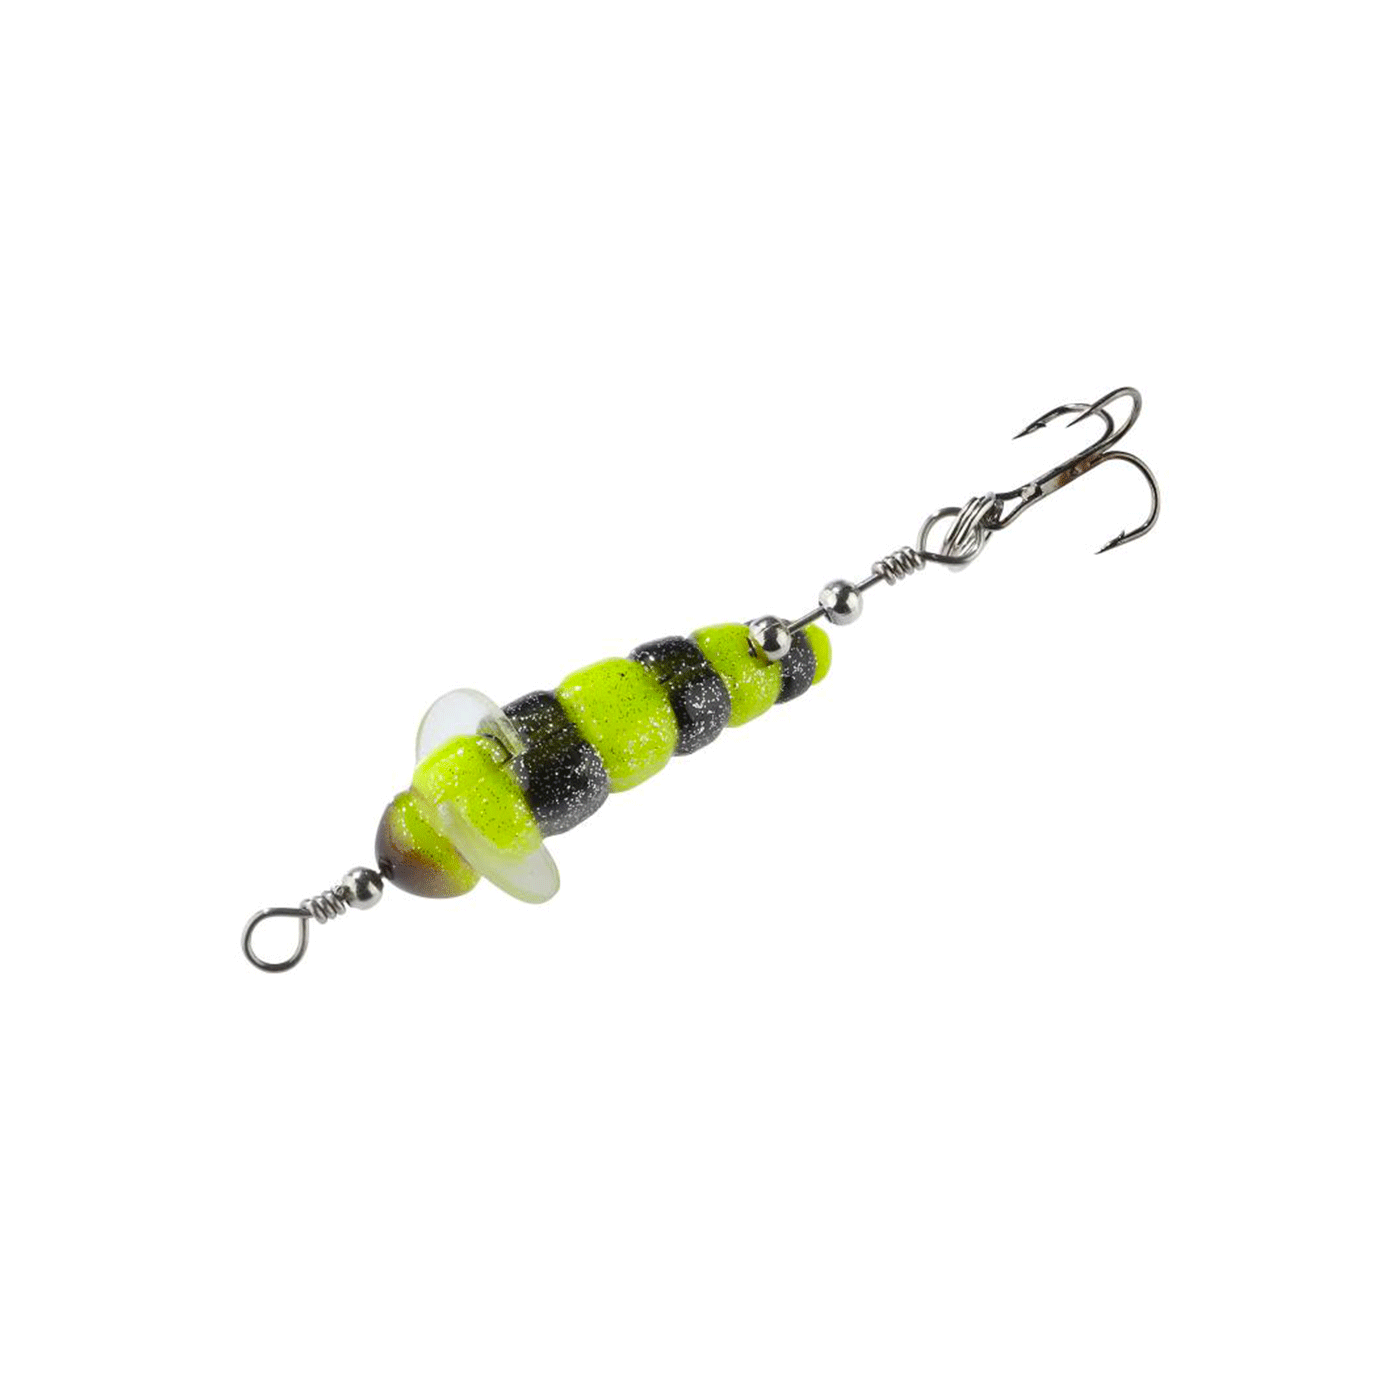 BALZER - TROUT ATTACK KILLER MADE SINKED 2.5g 4cm Yellow Black